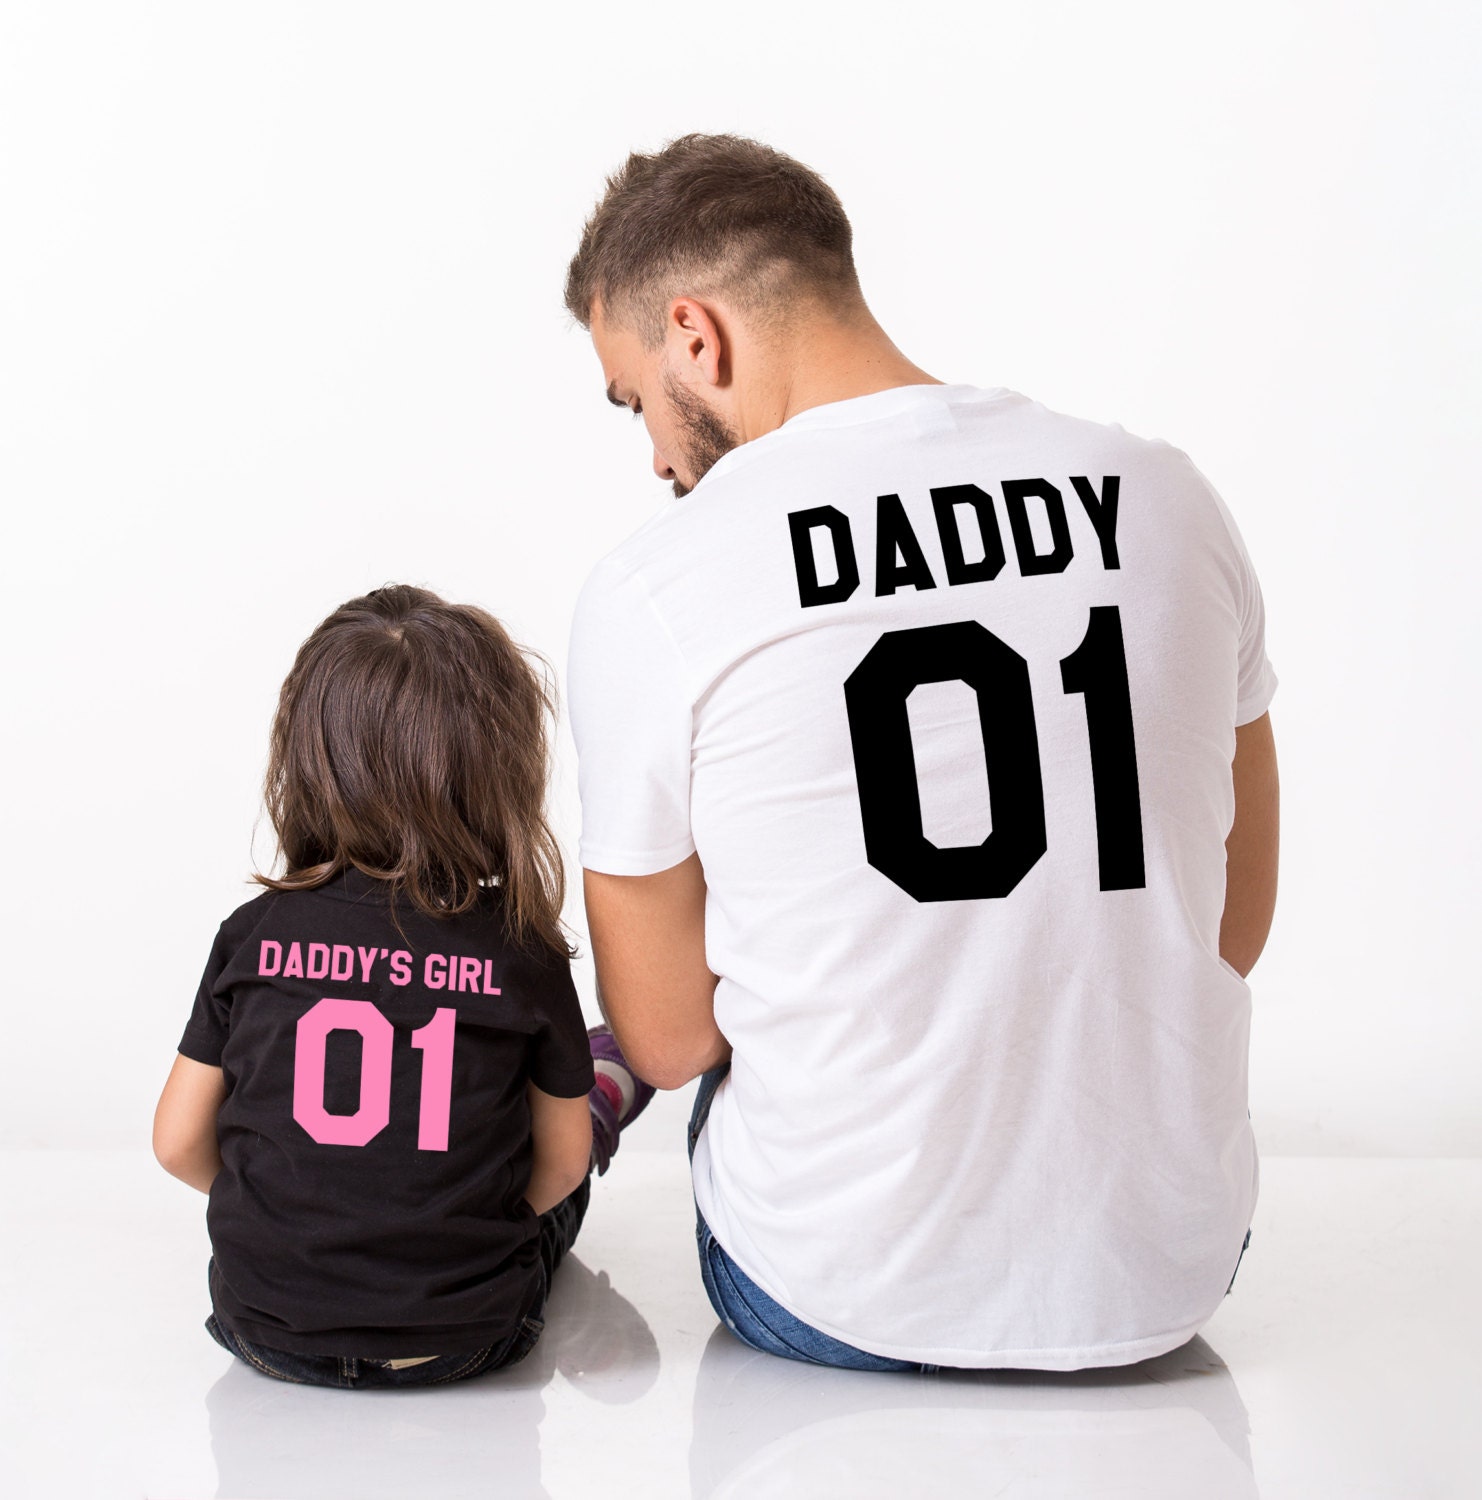 Matching T Shirts Dad and Son T Shirt Set Father and Daughter T Shirt Sets Daddy & Princess Established Daddy T-Shirt Twinning Set